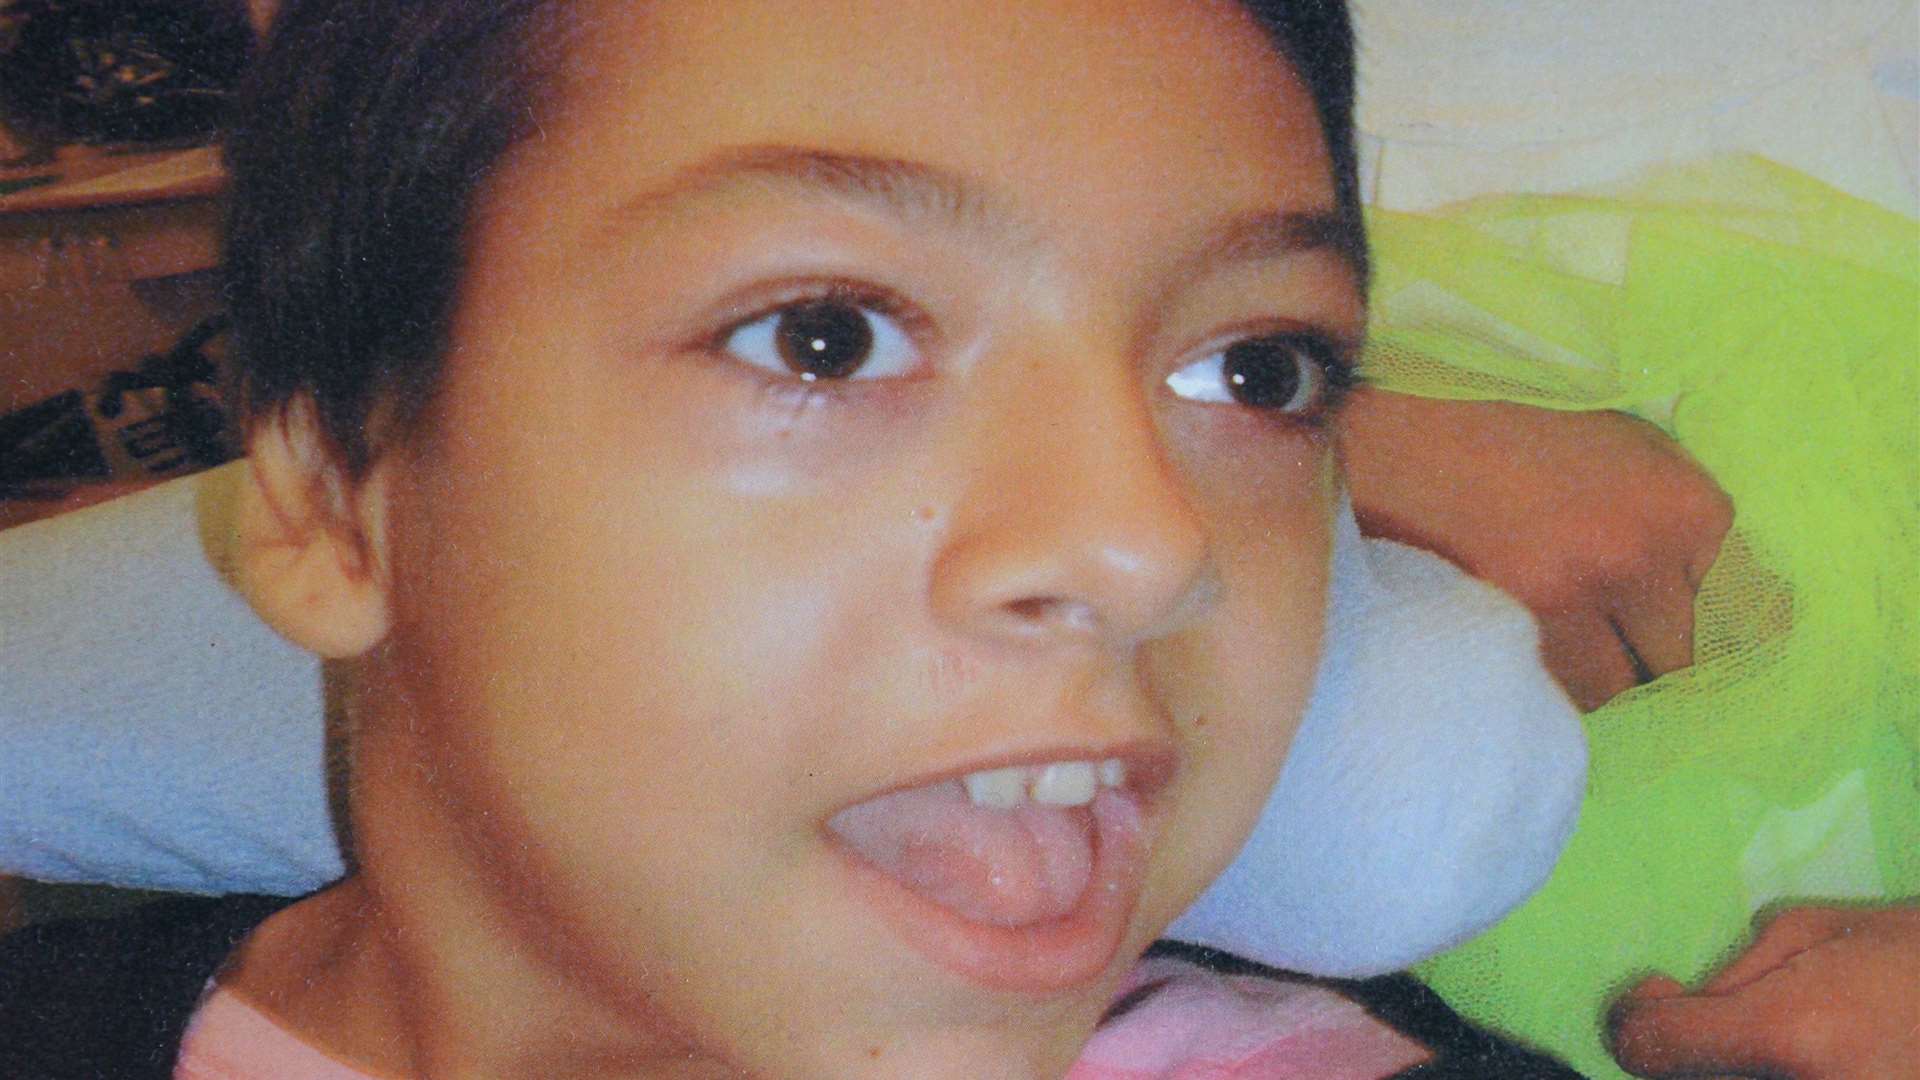 Ana-Maria was 10 when she died